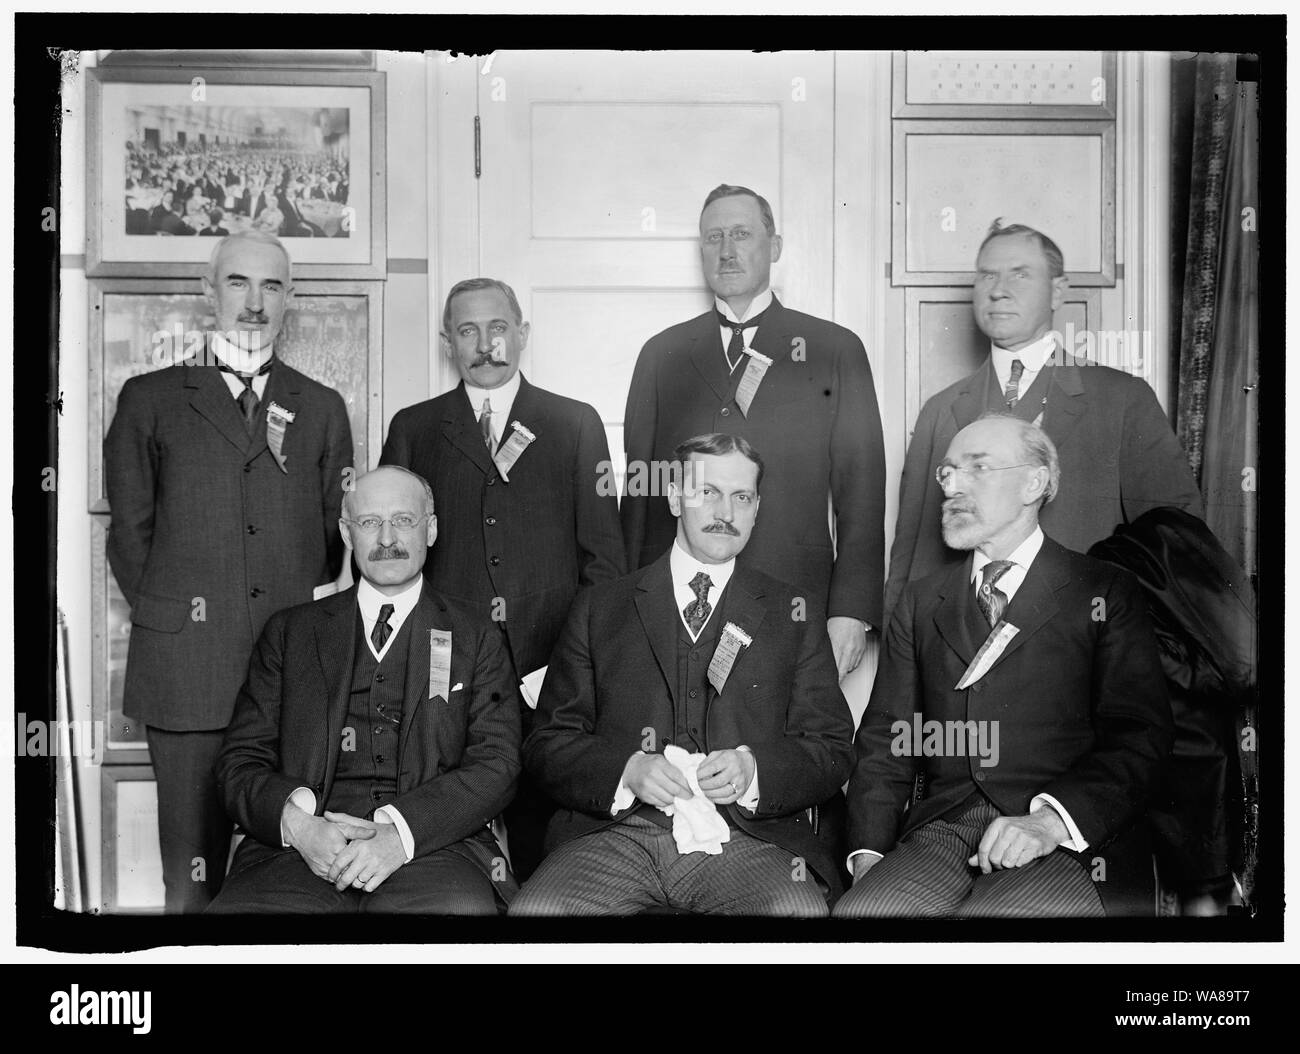 CHAMBER OF COMERCE OF U.S.A. DIRECTORS. REAR: JOHN H. FAYEY; W.M. McCORMICK; R. G. RHETT; T.L.L. TEMPLE. FRONT: AUGUST H. VOGEL; HARRY A. WHEELER, PRESIDENT;AT RIGHT REAR IS CHARLES R. VAN HISE, PRESIDENT OF THE UNIVERSITY OF WISCONSIN Stock Photo